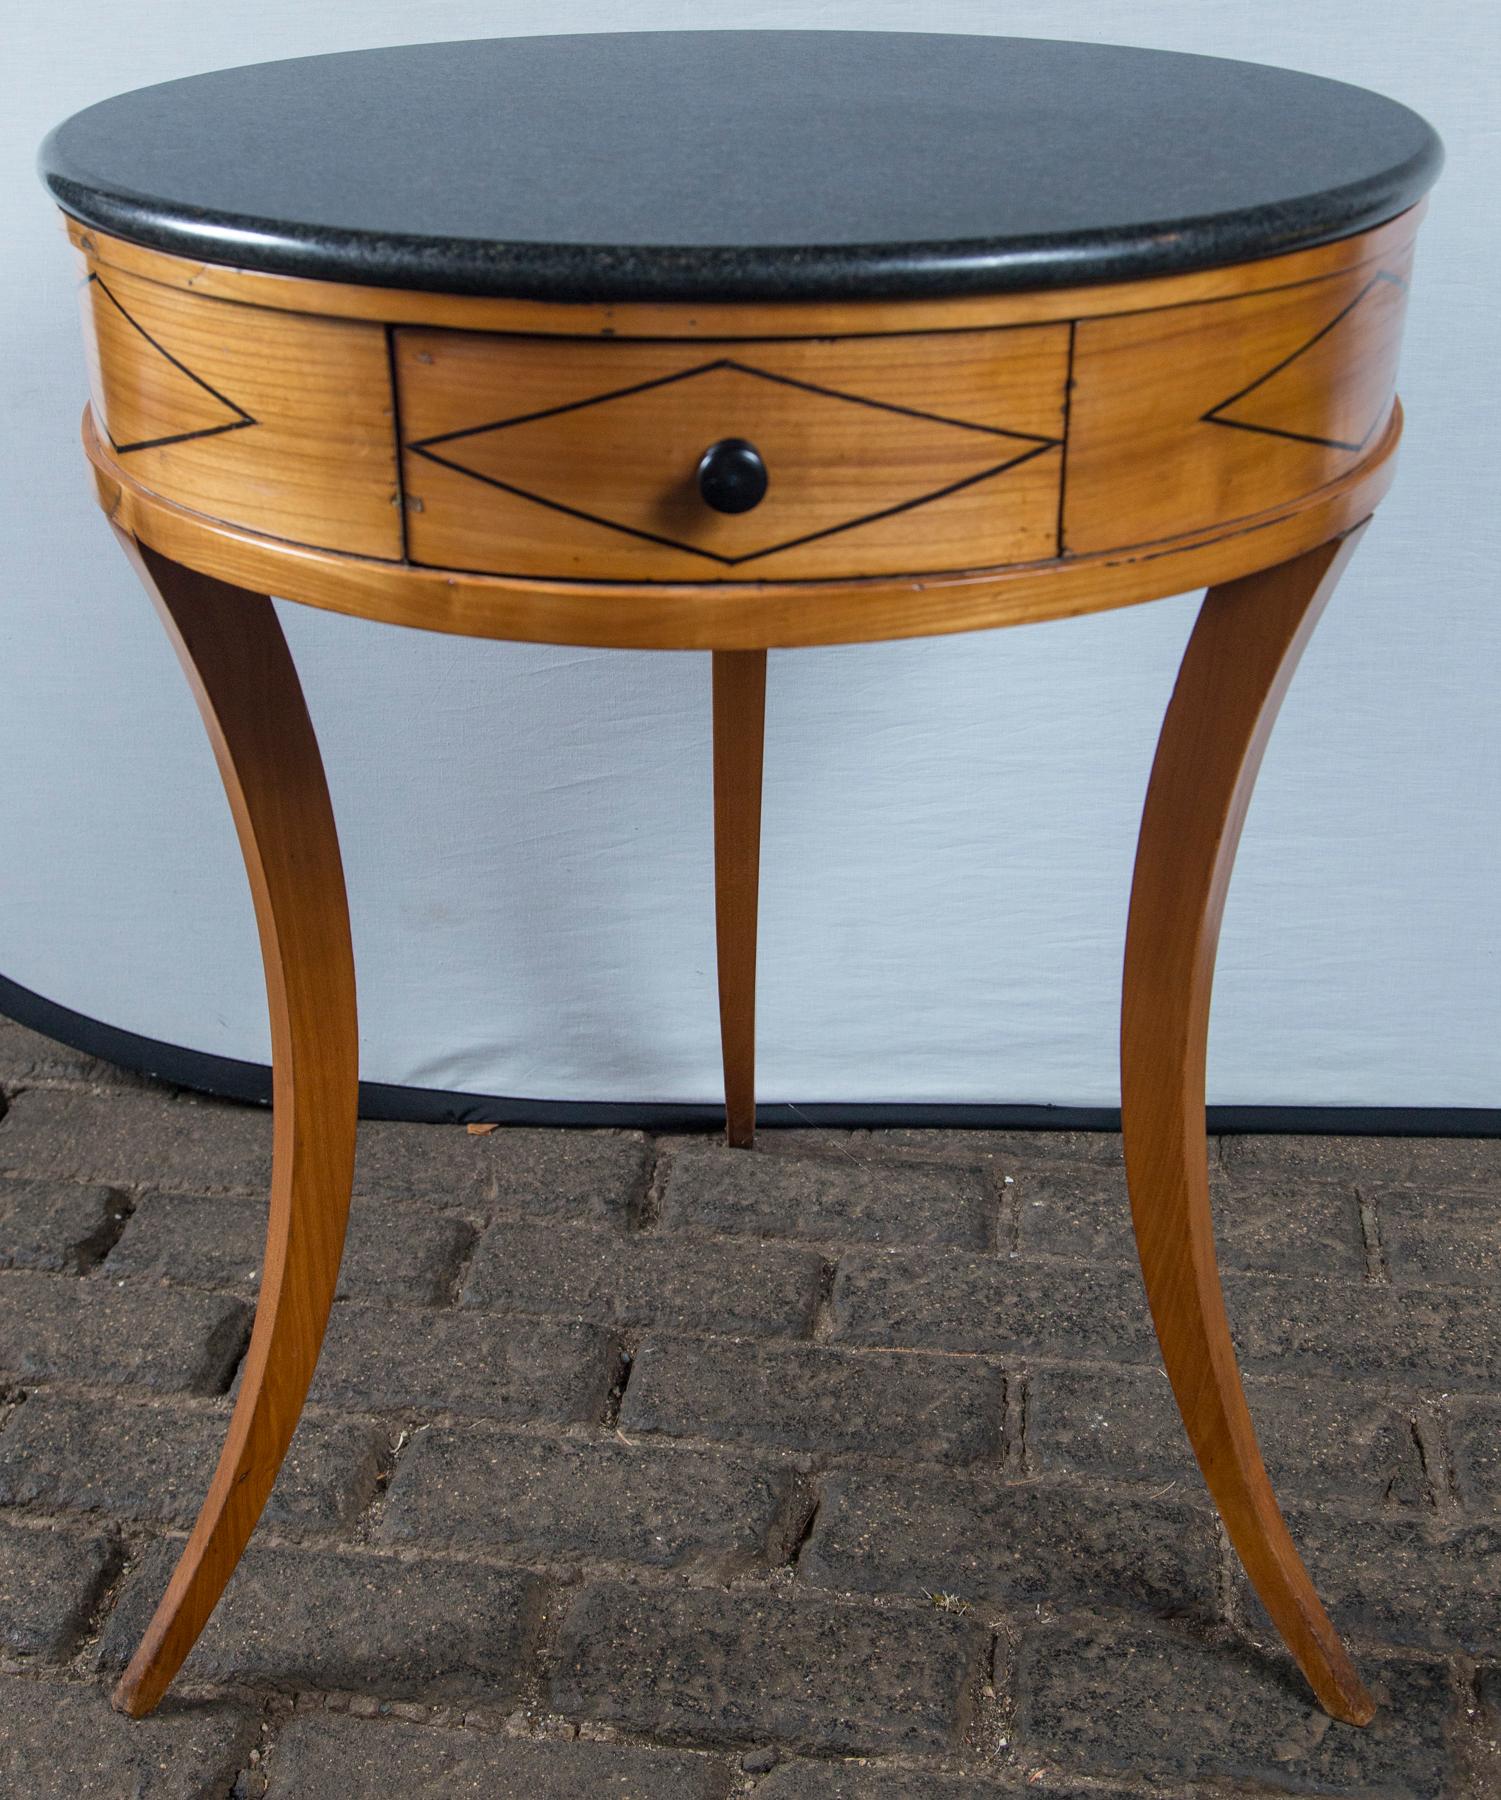 Black marble-top round wood Directoire table with delicate splayed legs, center drawer, ebony wood marquetry.